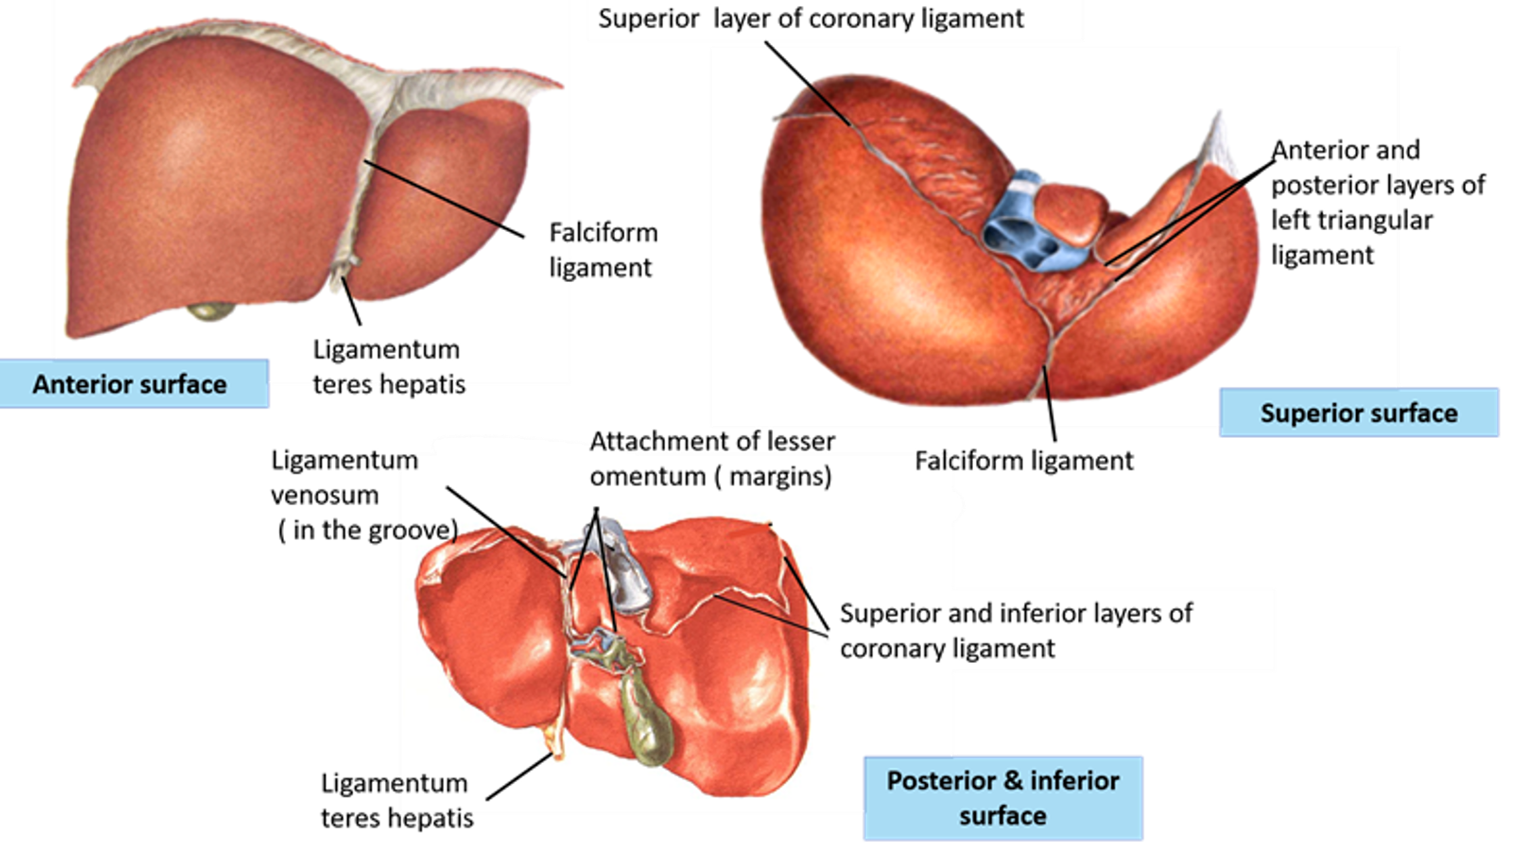 liver - peritoneal folds and ligaments